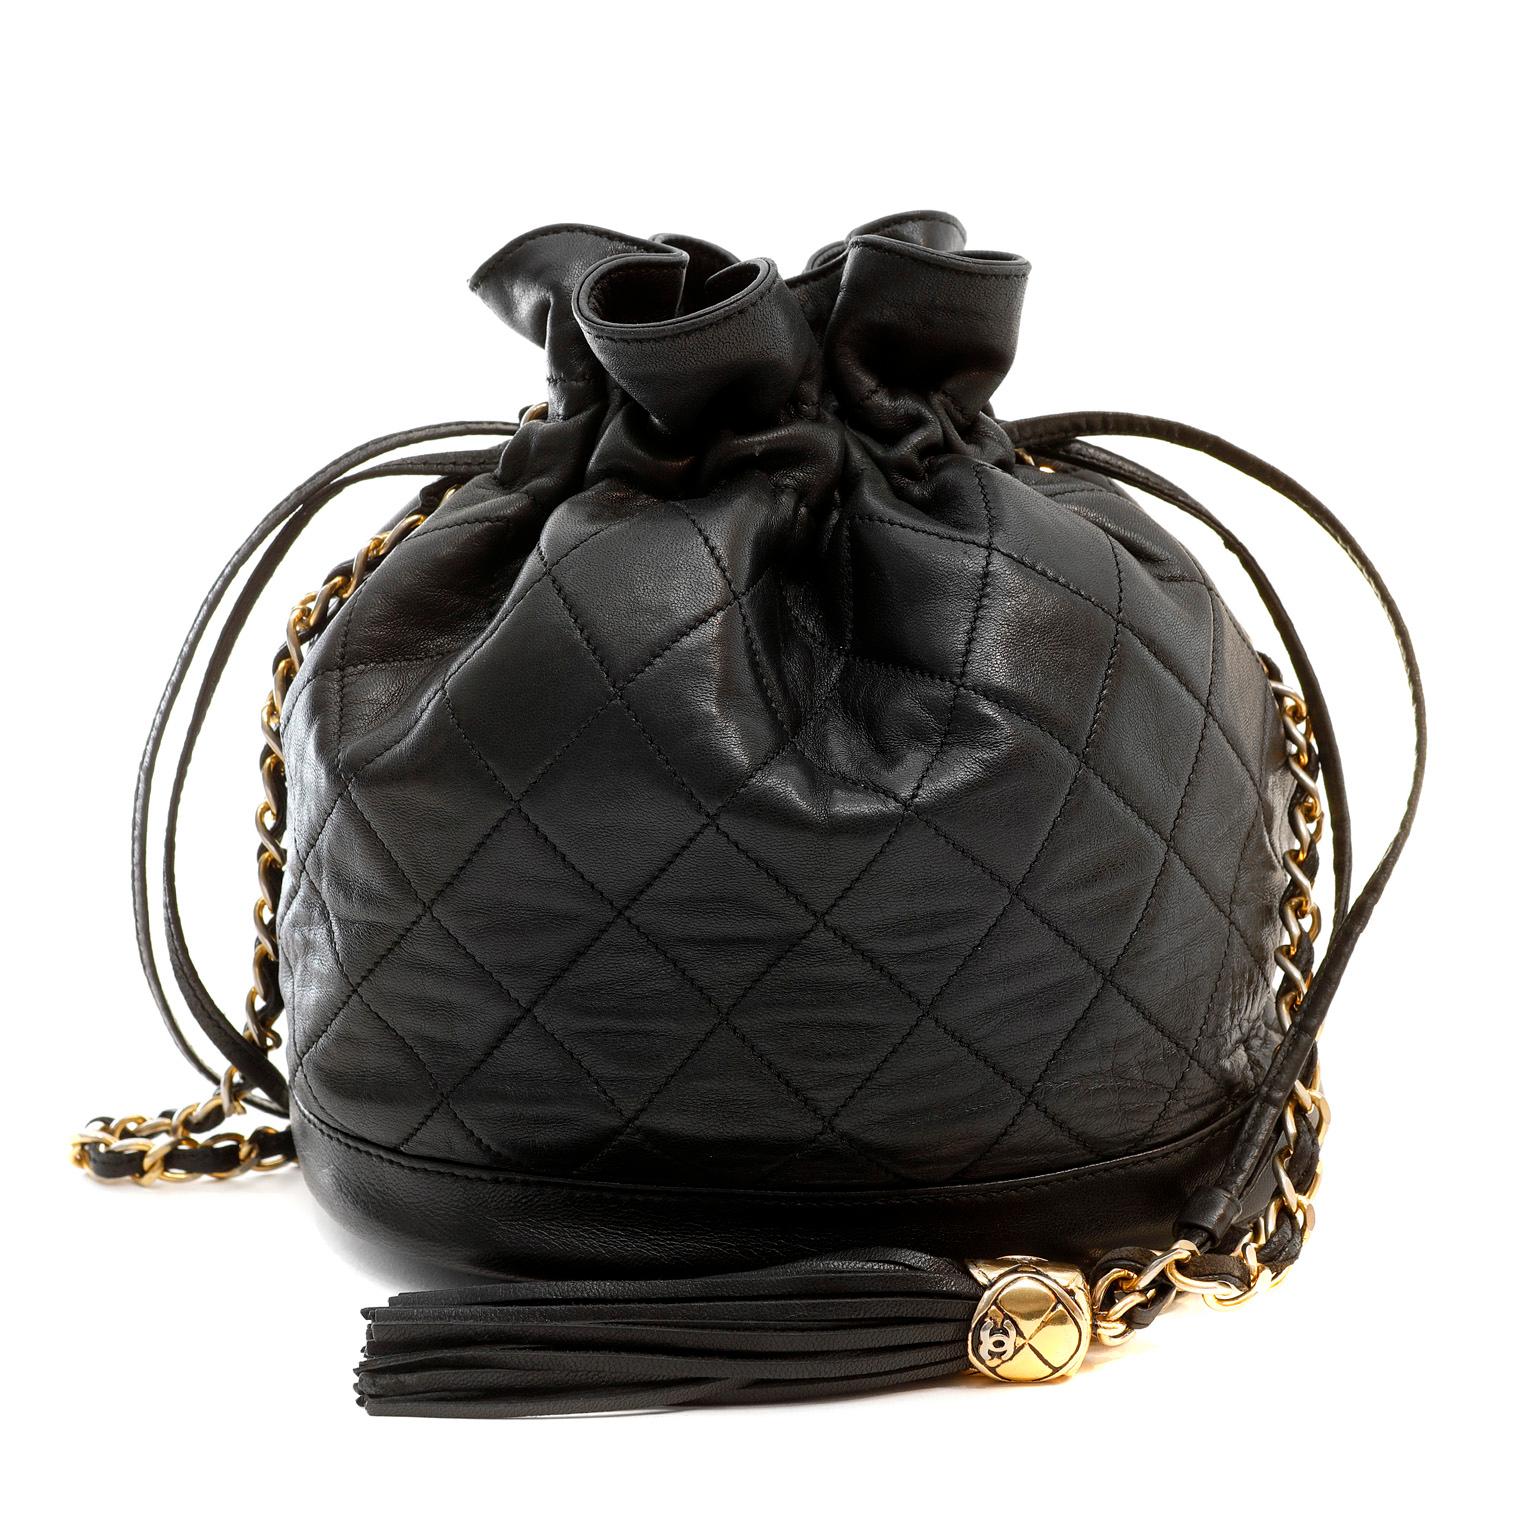 This authentic Chanel Black Lambskin Drawstring Crossbody Bag is in good previously owned condition. Supple black lambskin is quilted in signature Chanel diamond pattern.  Sac shape with leather drawstring closure.  Single leather and gold chain